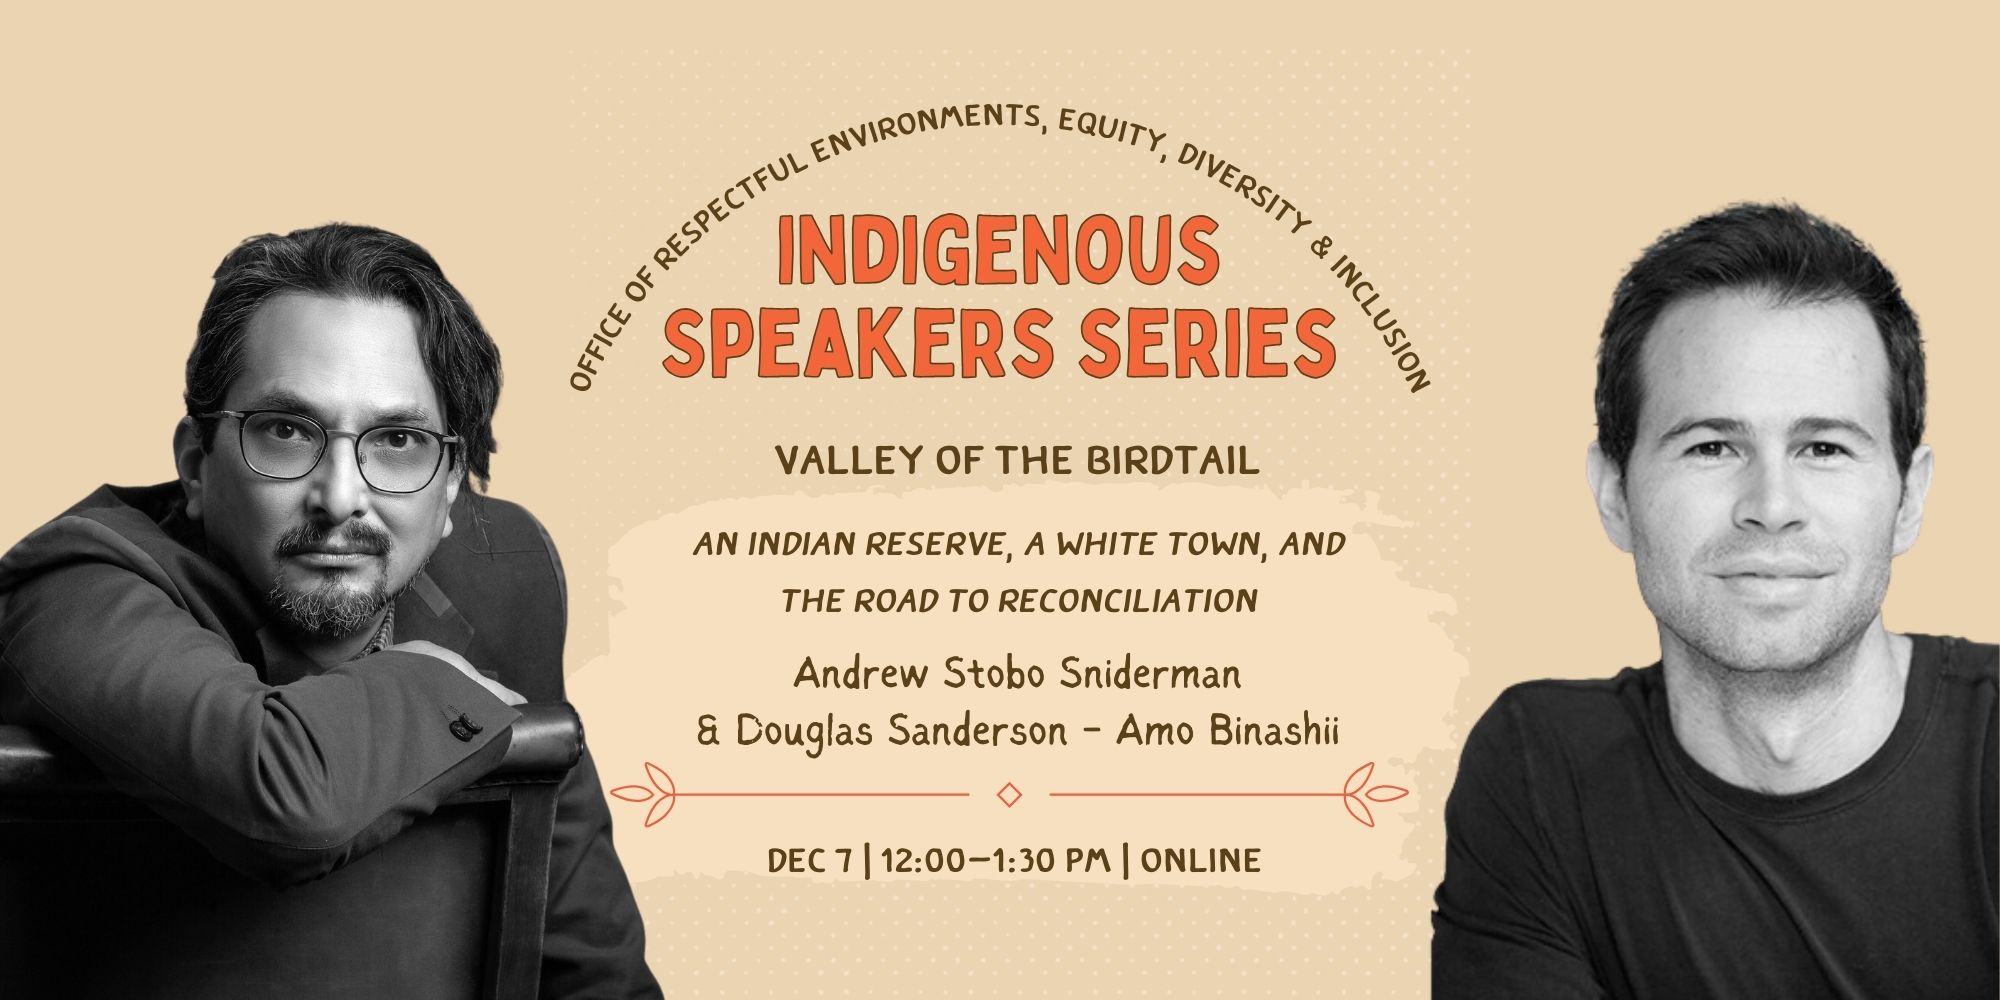 Valley of the Birdtail: An Indian Reserve, A White Town, and the Road to Reconciliation